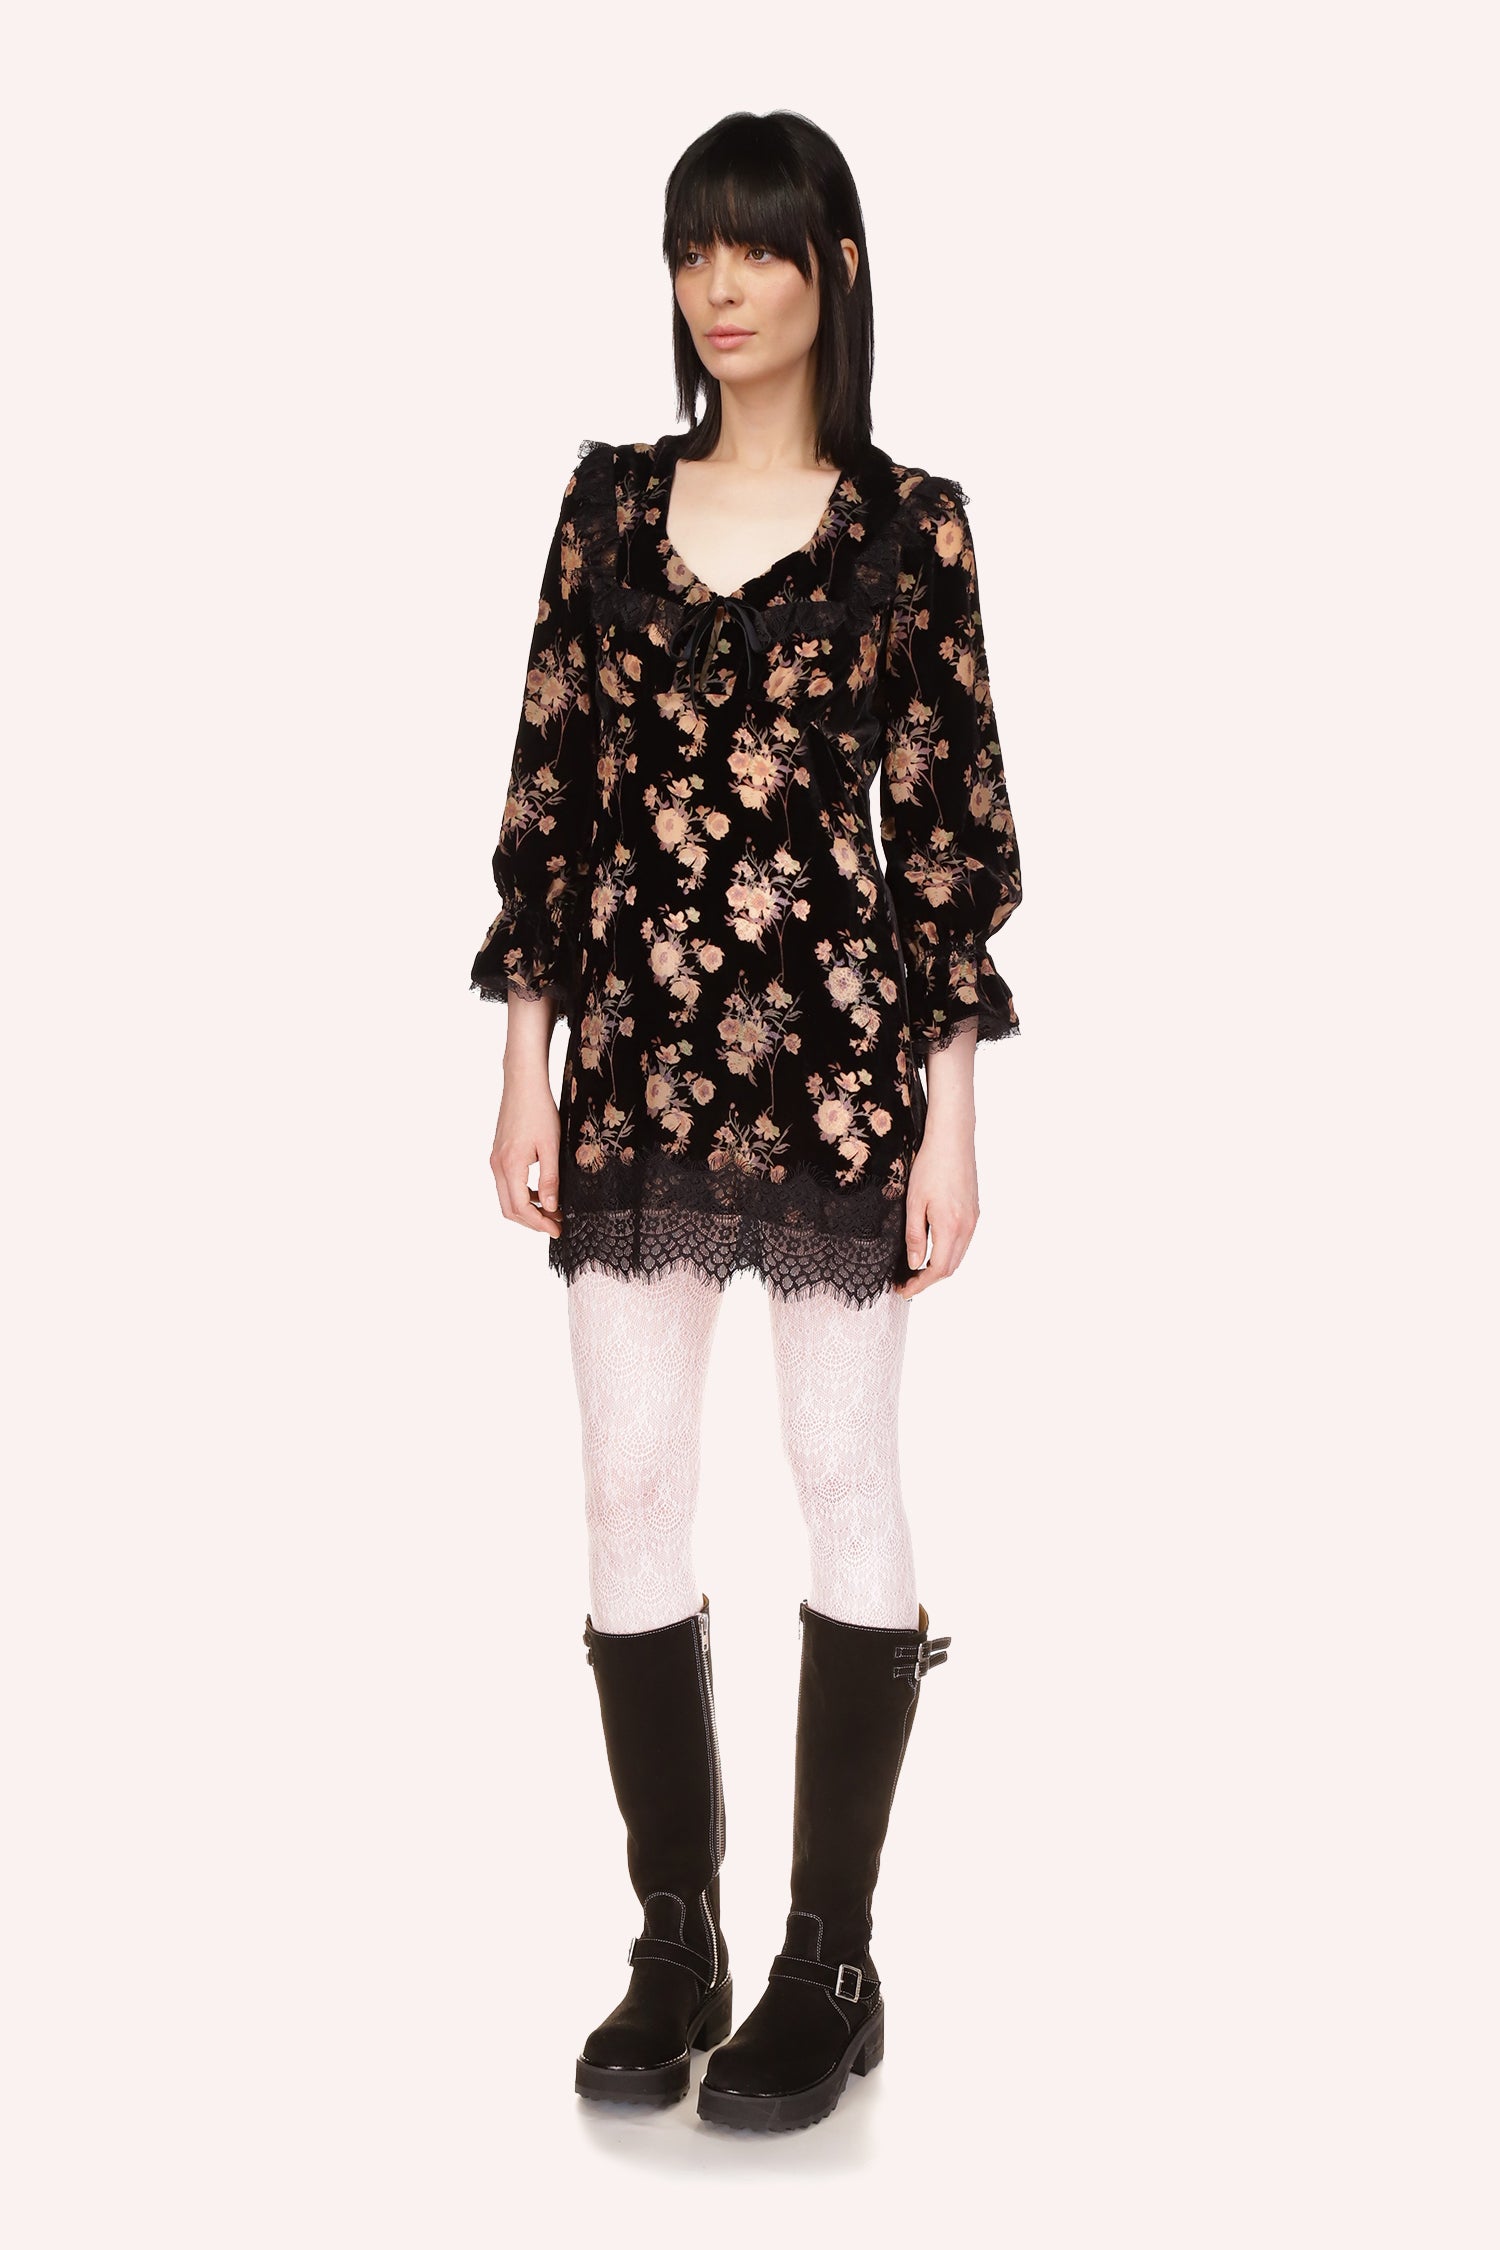 Front Dress in Black is with beige floral bouquet pattern, V-shaped collar, long sleeves, and black lace at collar and hem